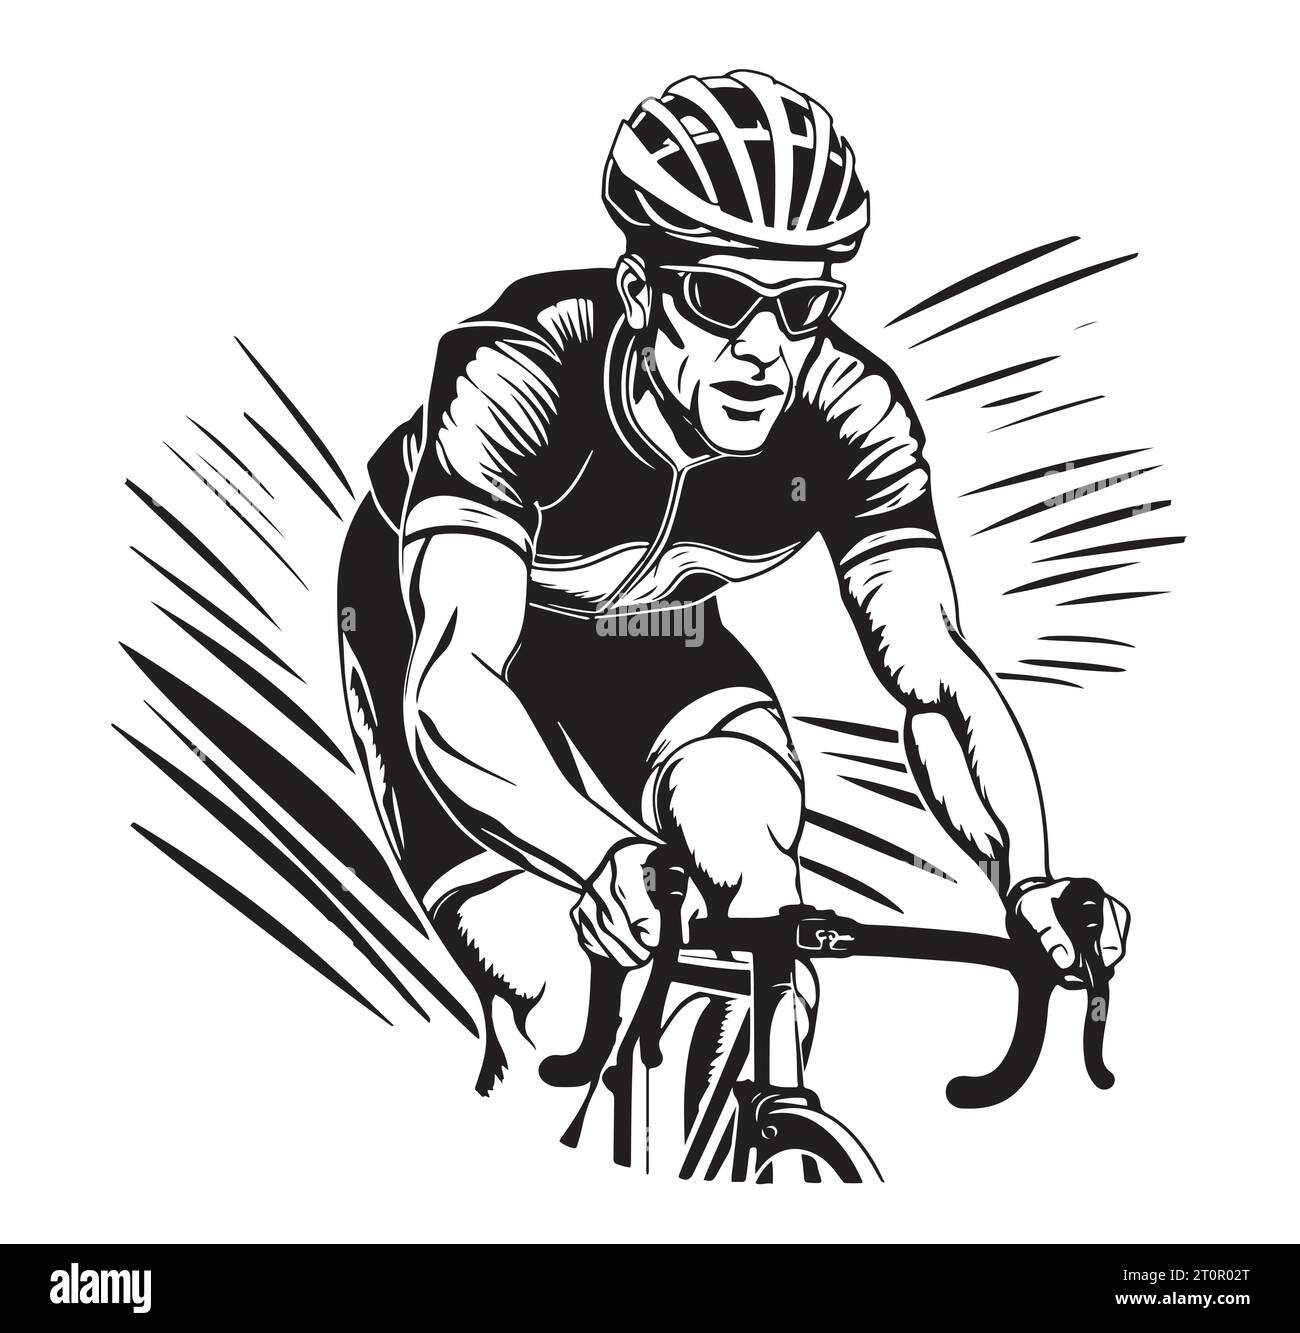 Cyclist emblem sketch hand drawn Vector Sport competition Stock Vector